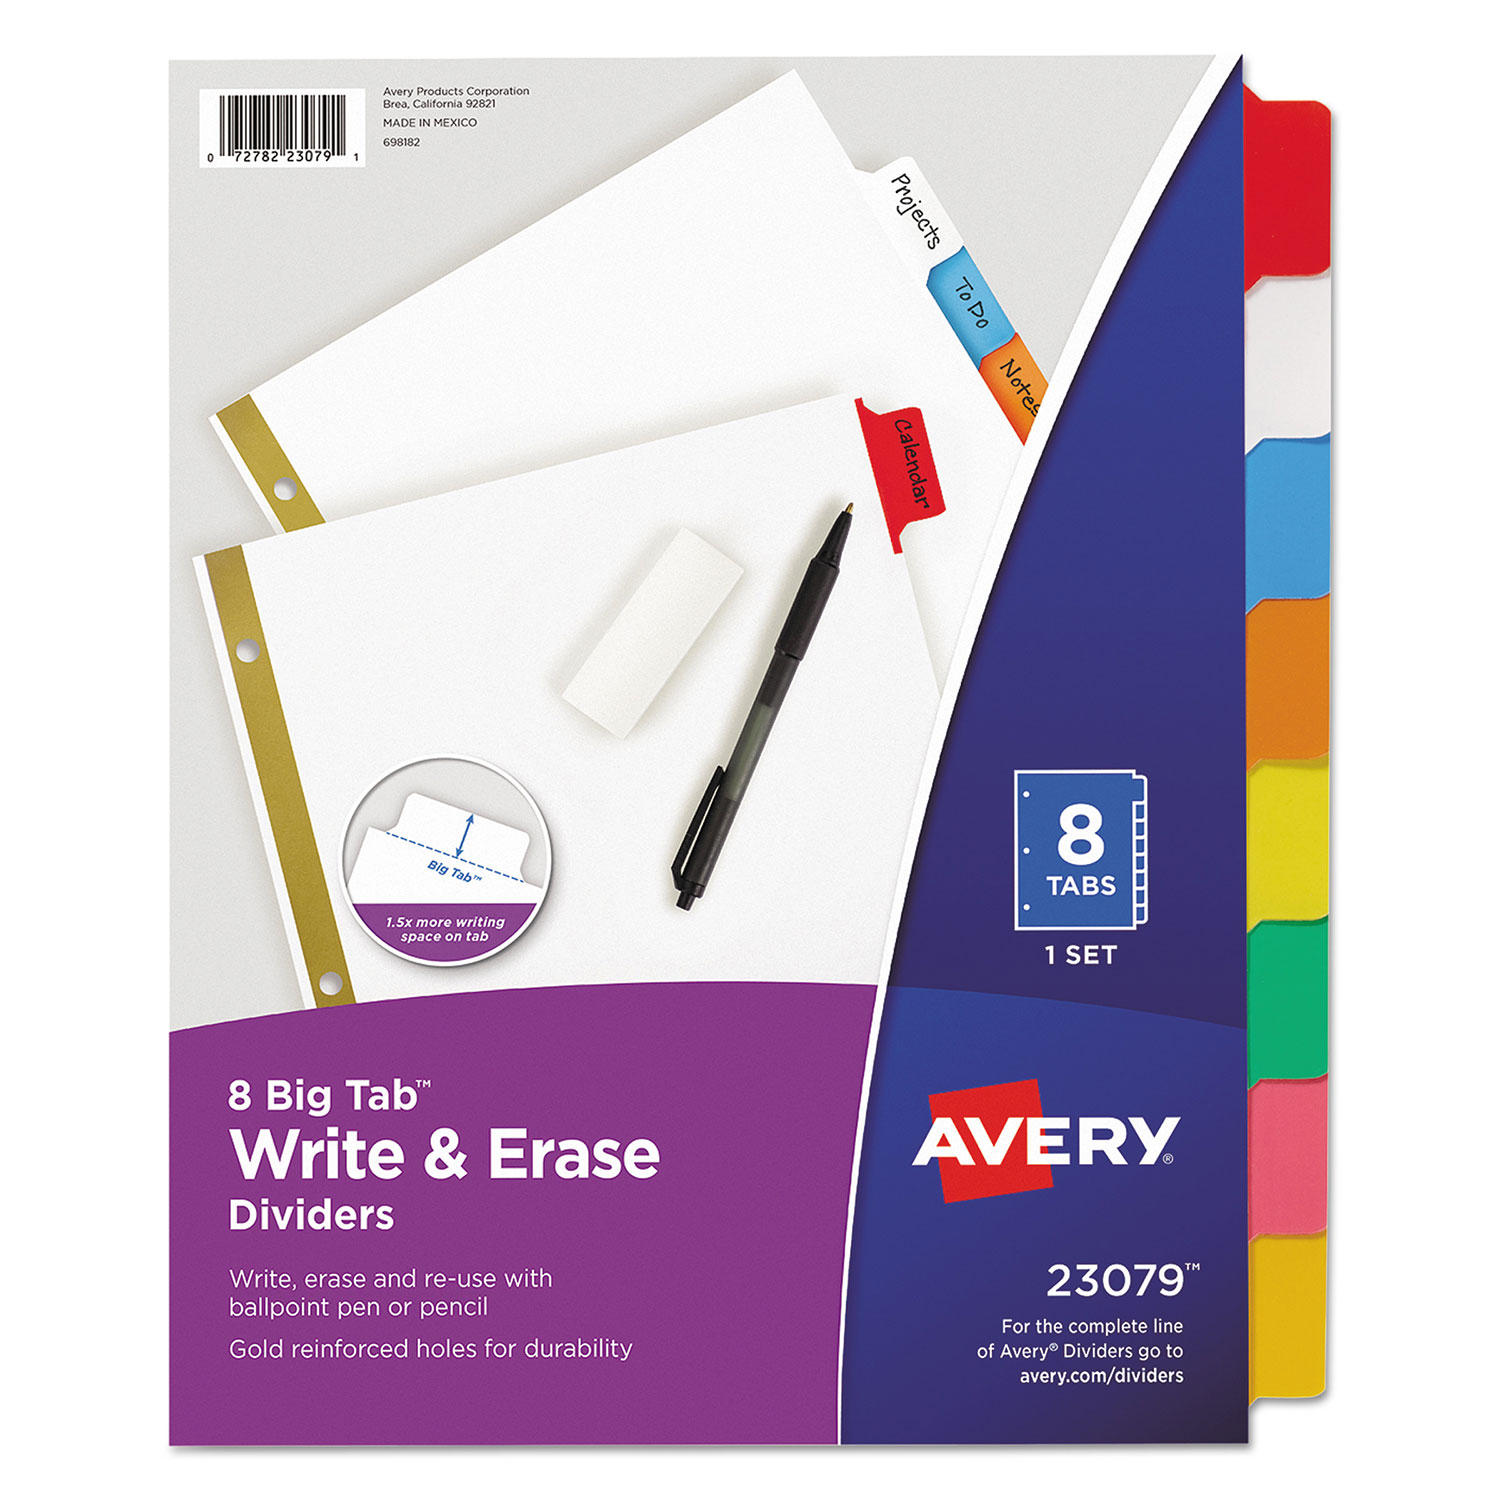 Avery 23079 - Big Tab Write-On White Dividers, 8 Multicolor Tabs - 1 Set (V)